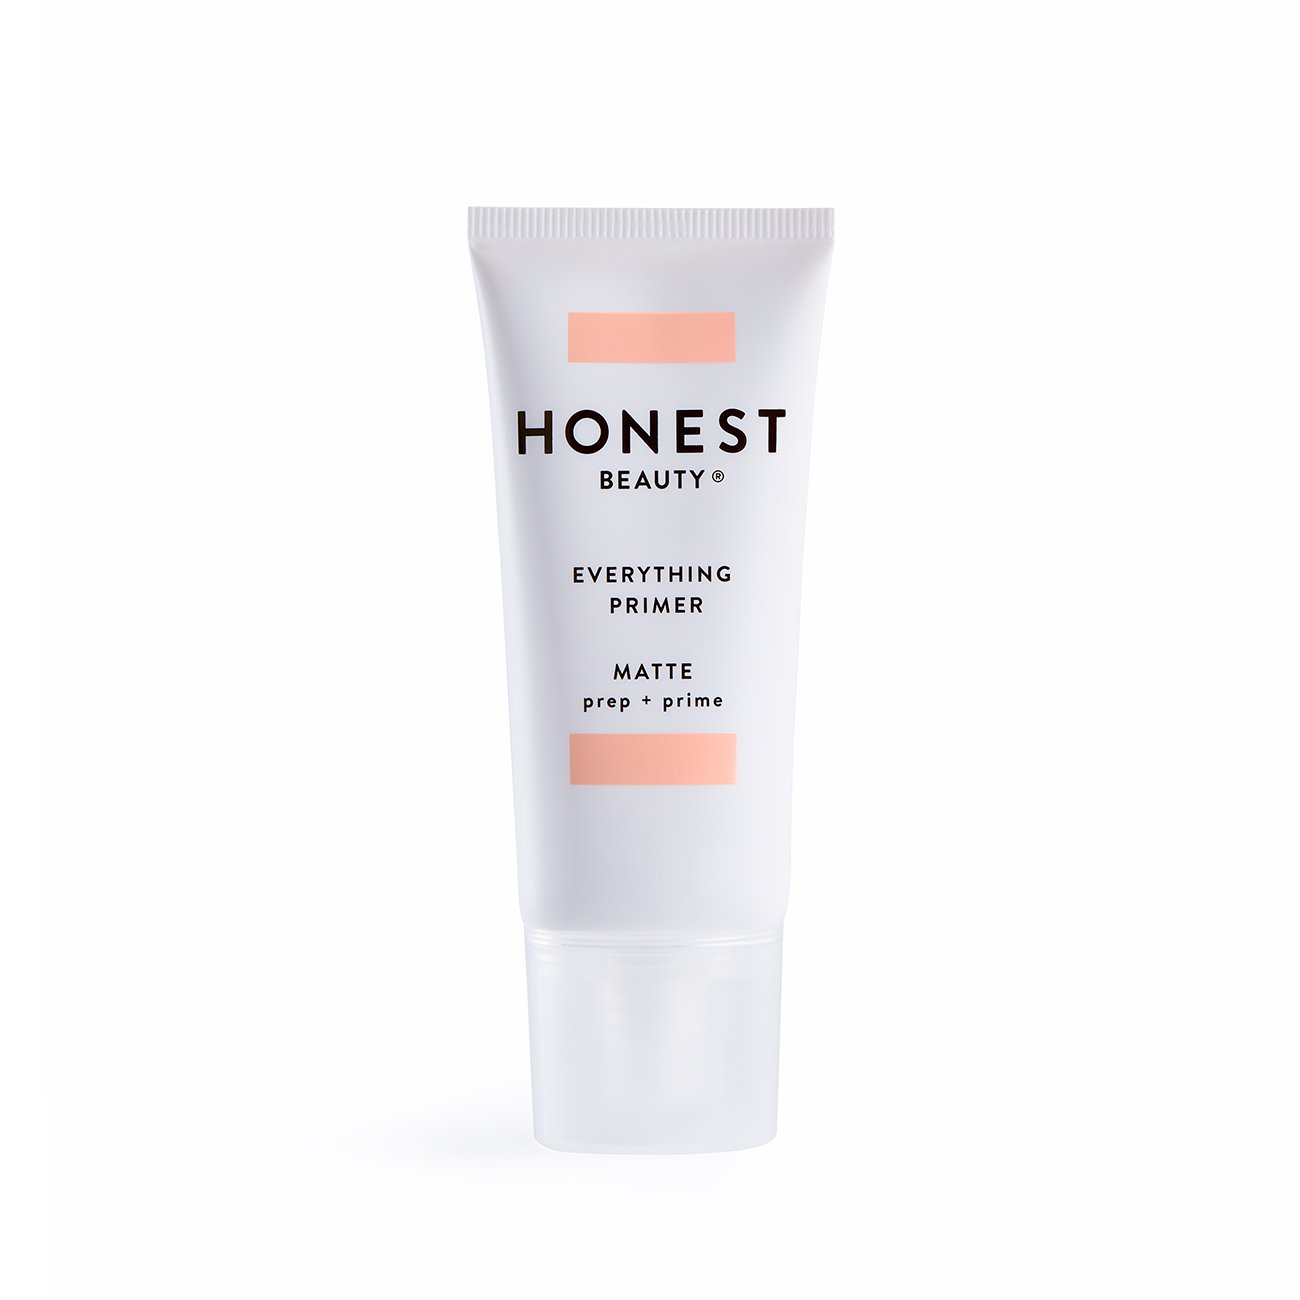  Honest Beauty Everything Primer with Micronized Bamboo Powder, Matte, 1 Fl Oz